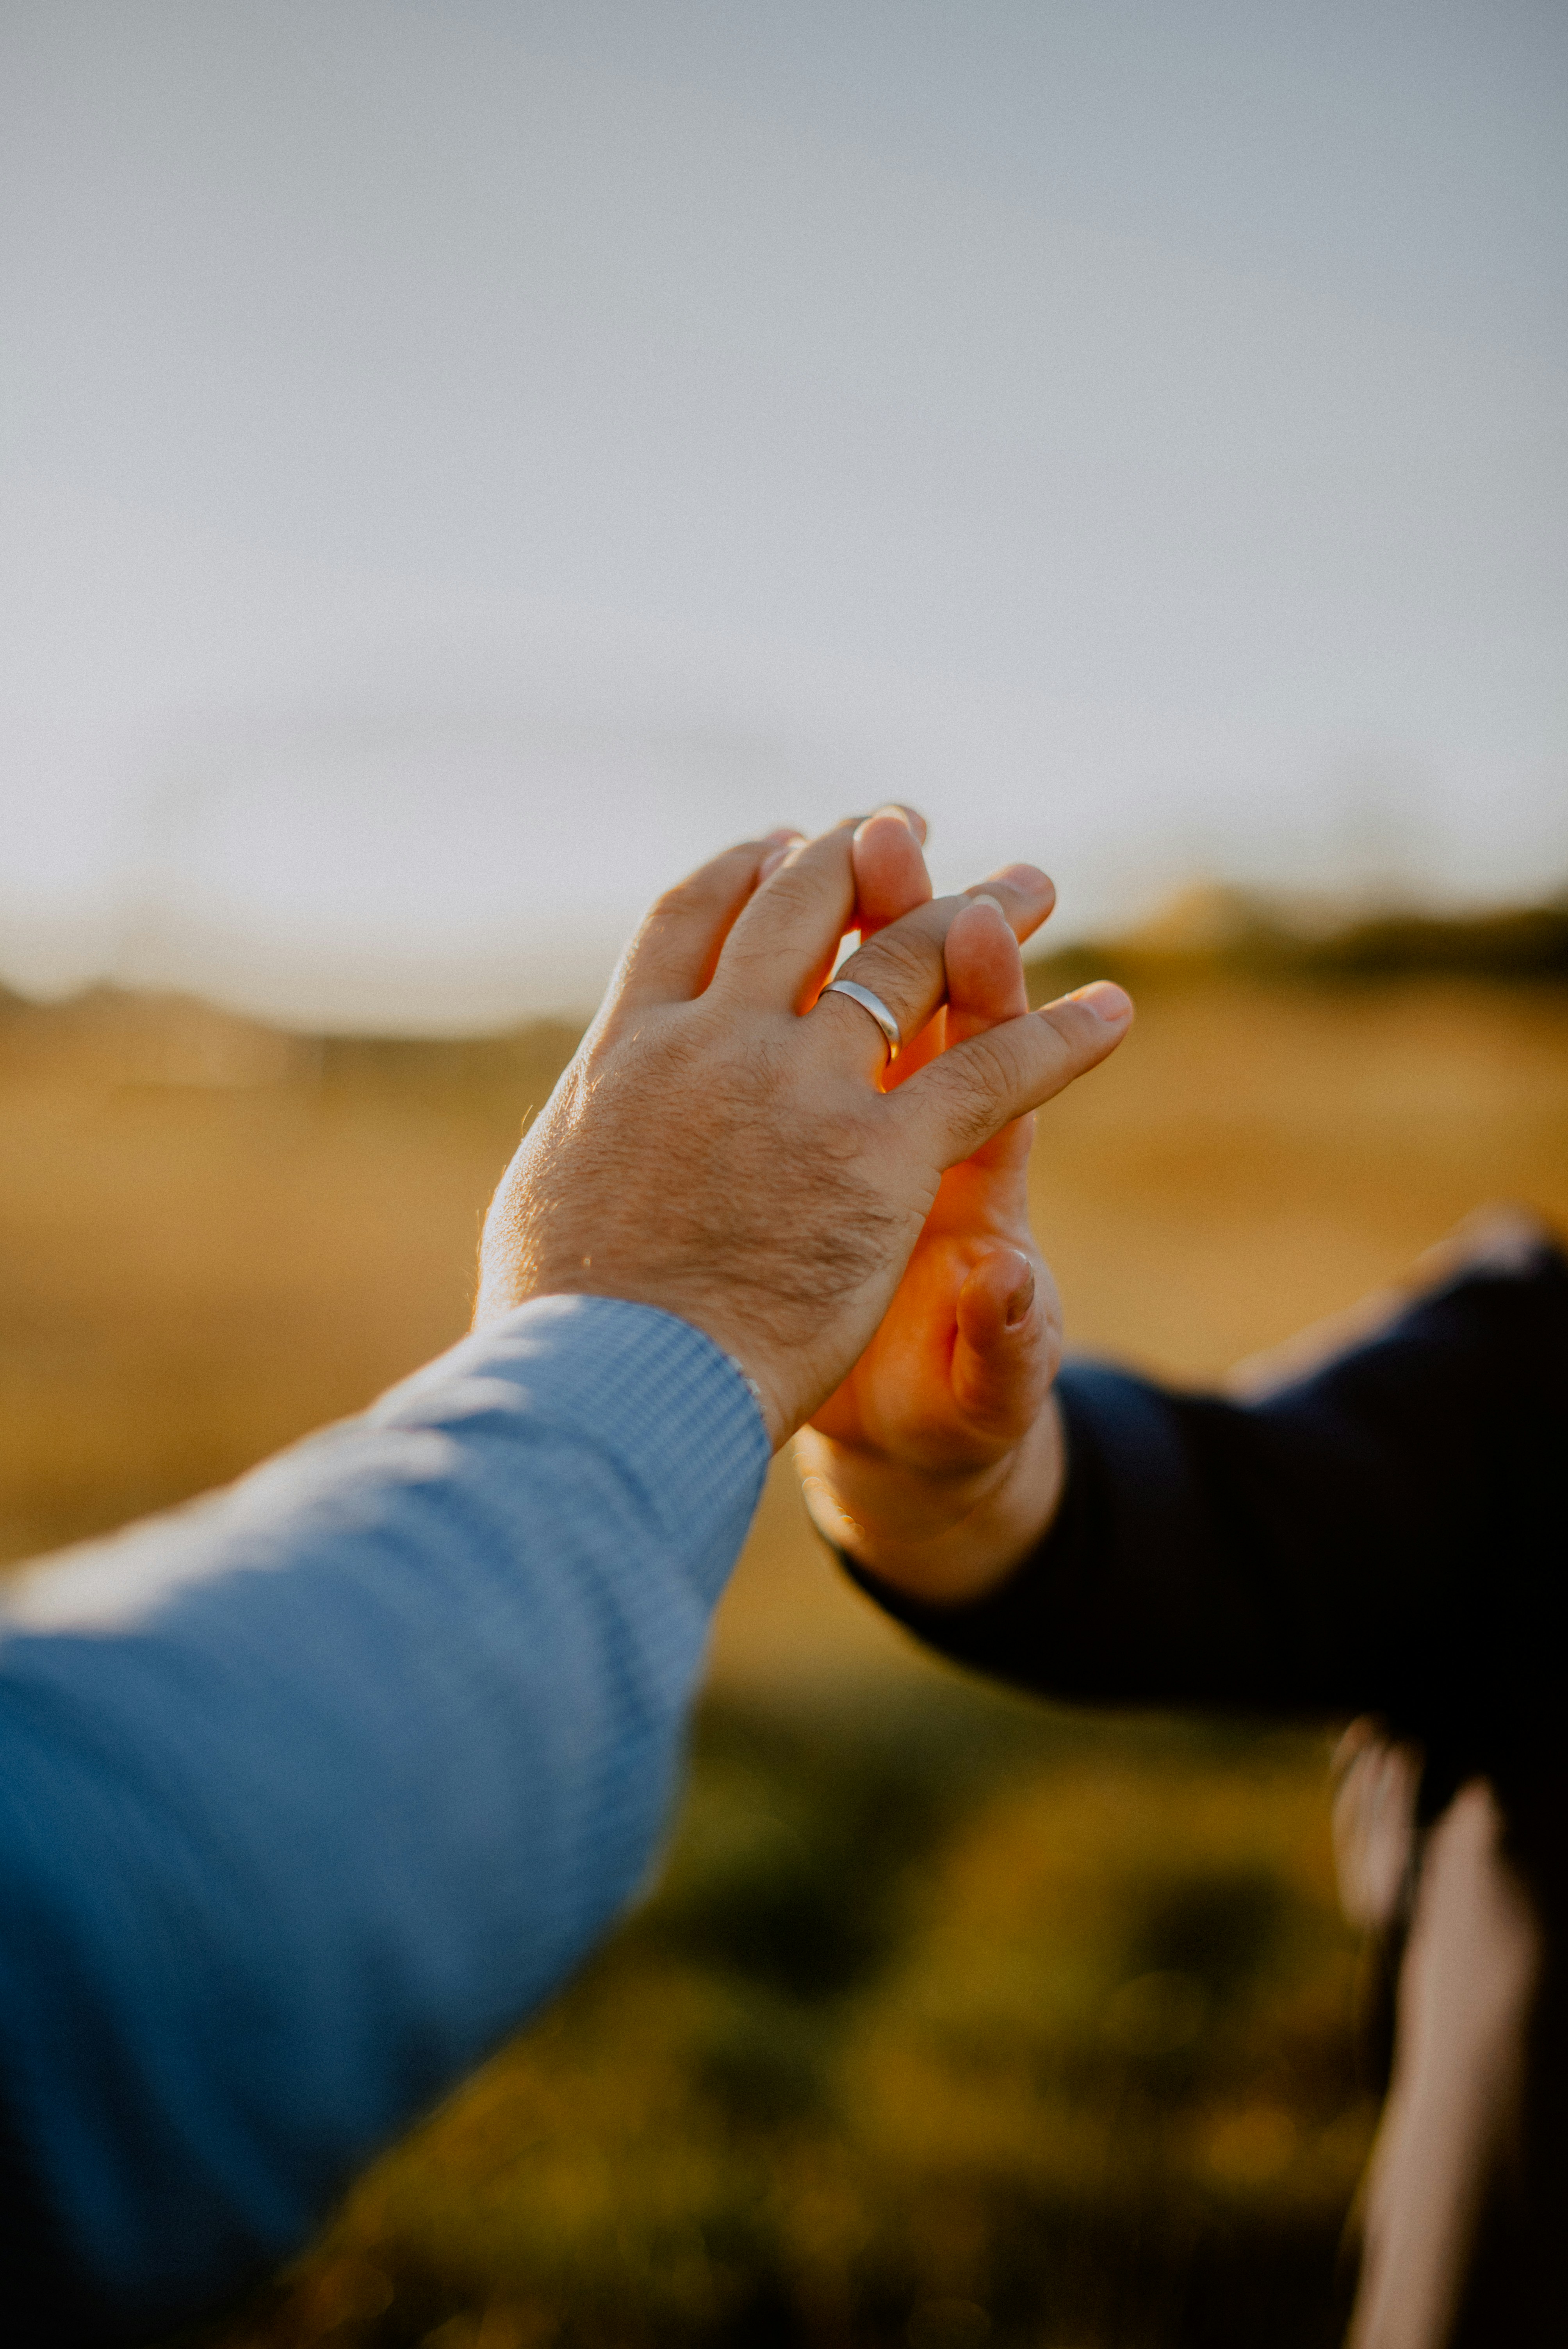 An image of two people touching hands